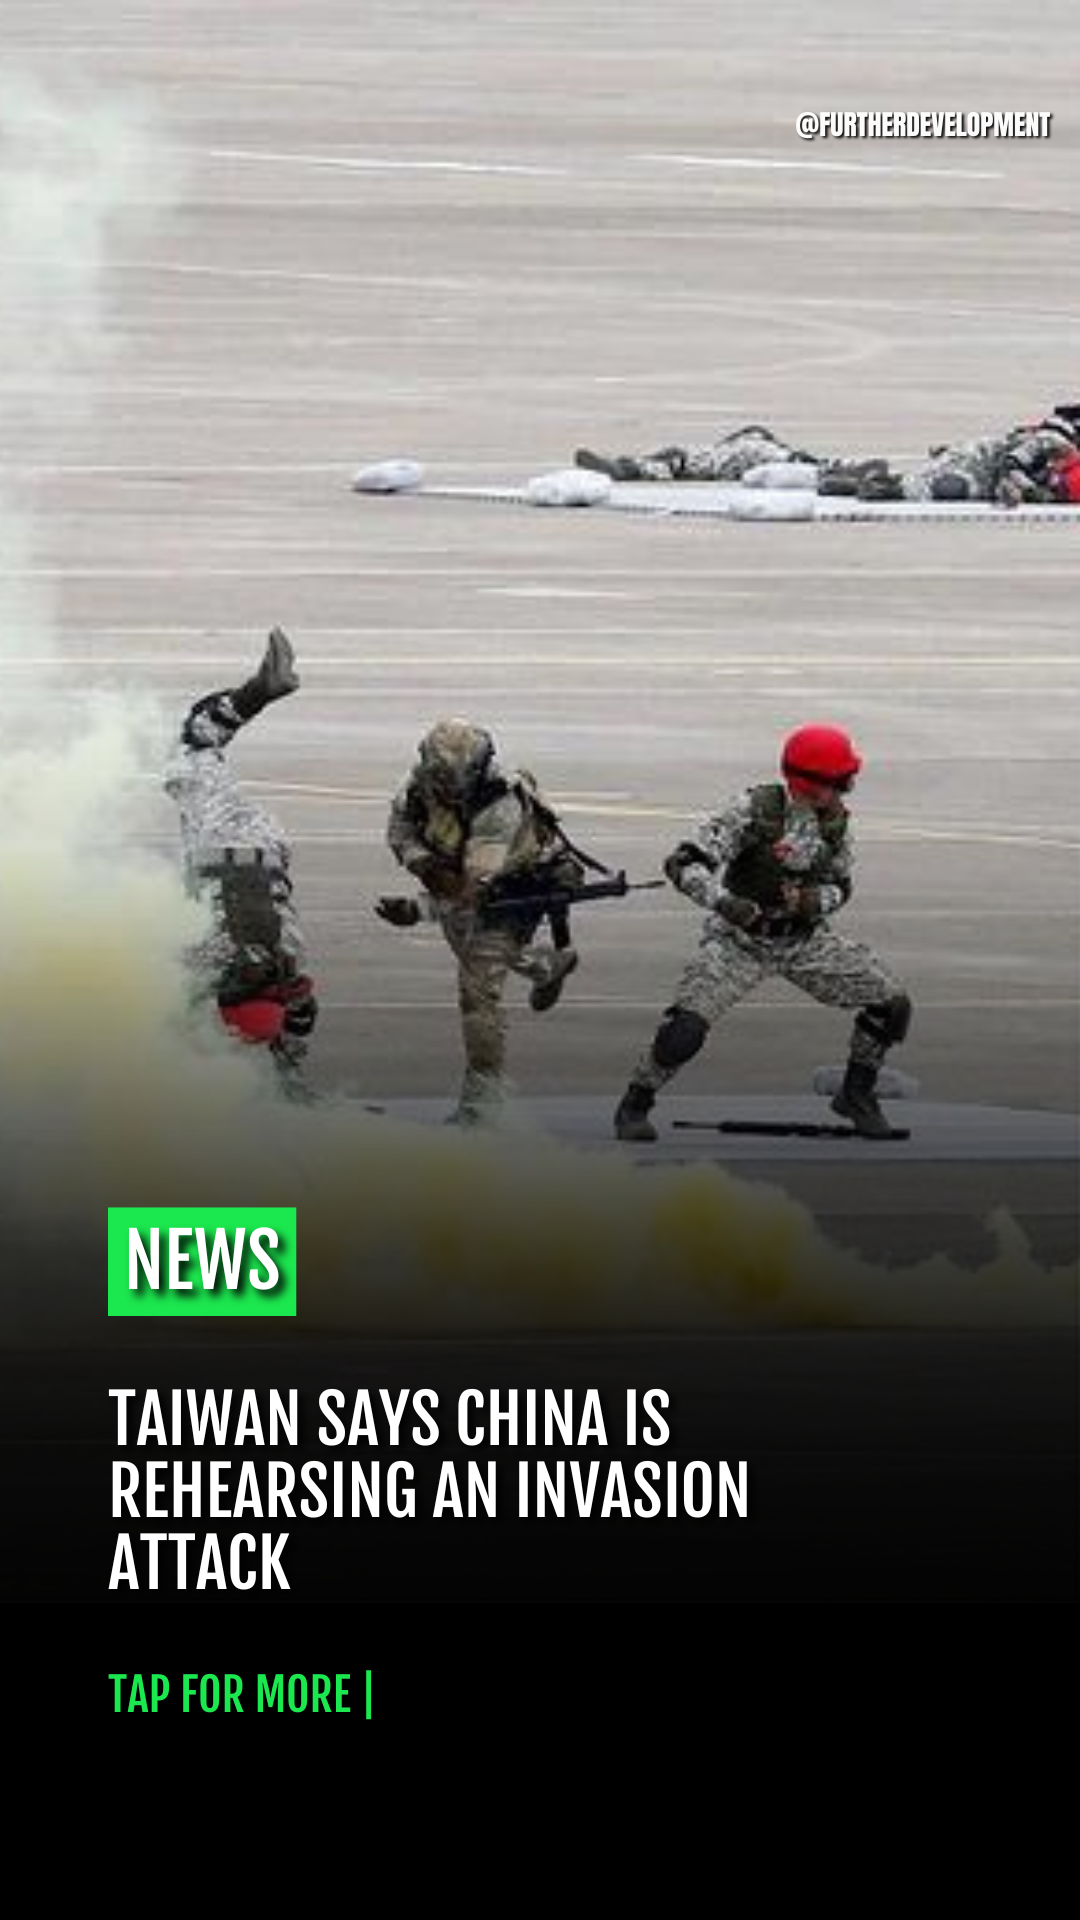 Taiwan says China is rehearsing an invasion attack